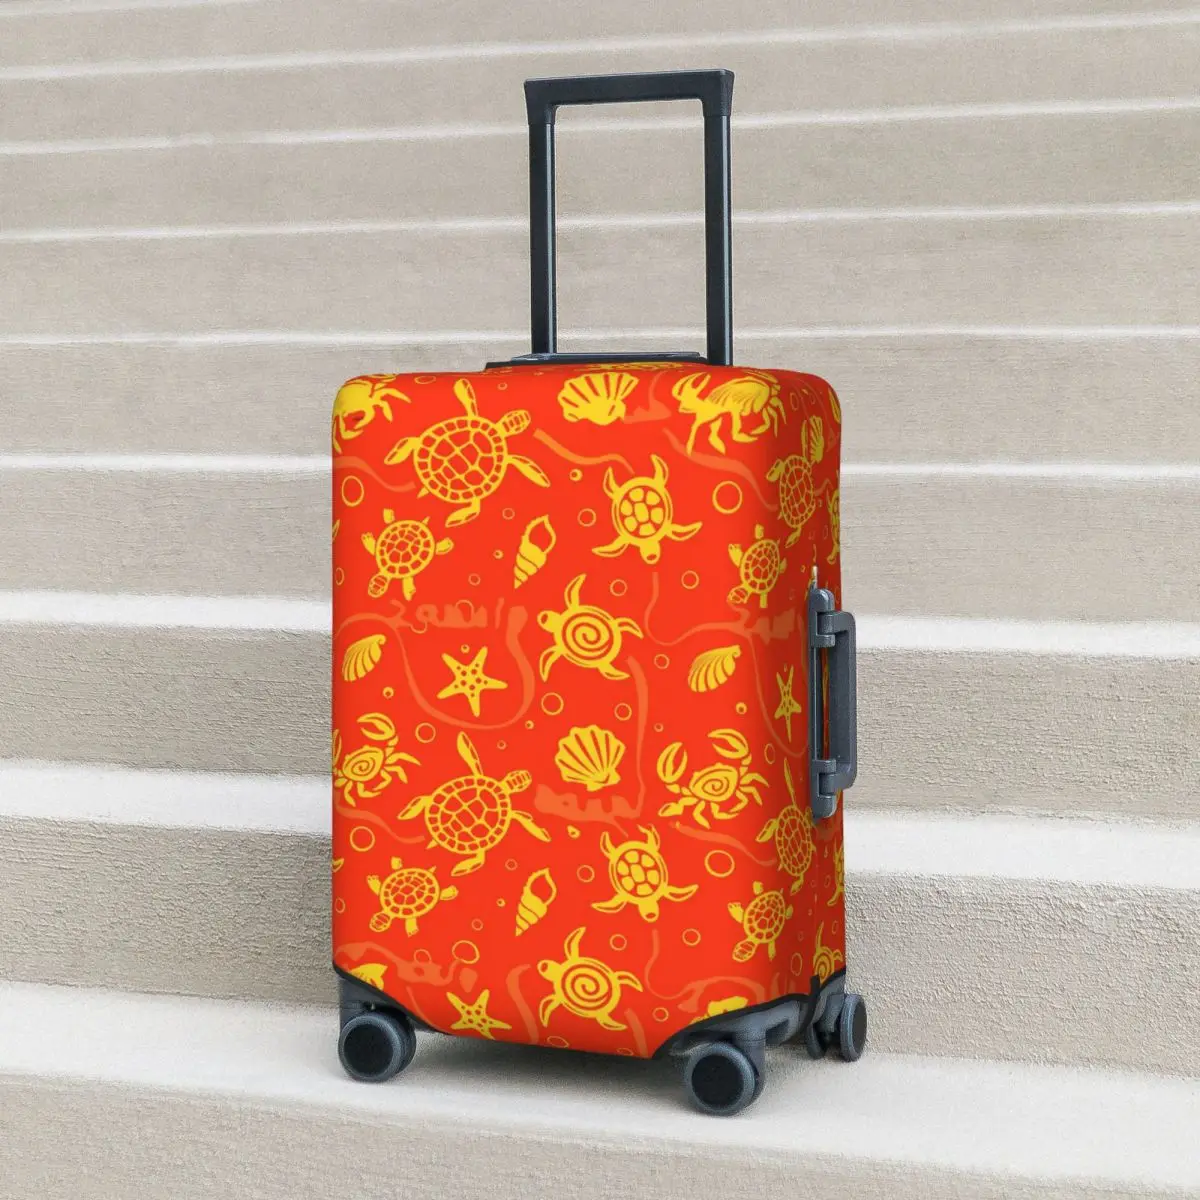 

Sea Turtle Suitcase Cover Ocean Life Print Holiday Cruise Trip Useful Luggage Supplies Protector